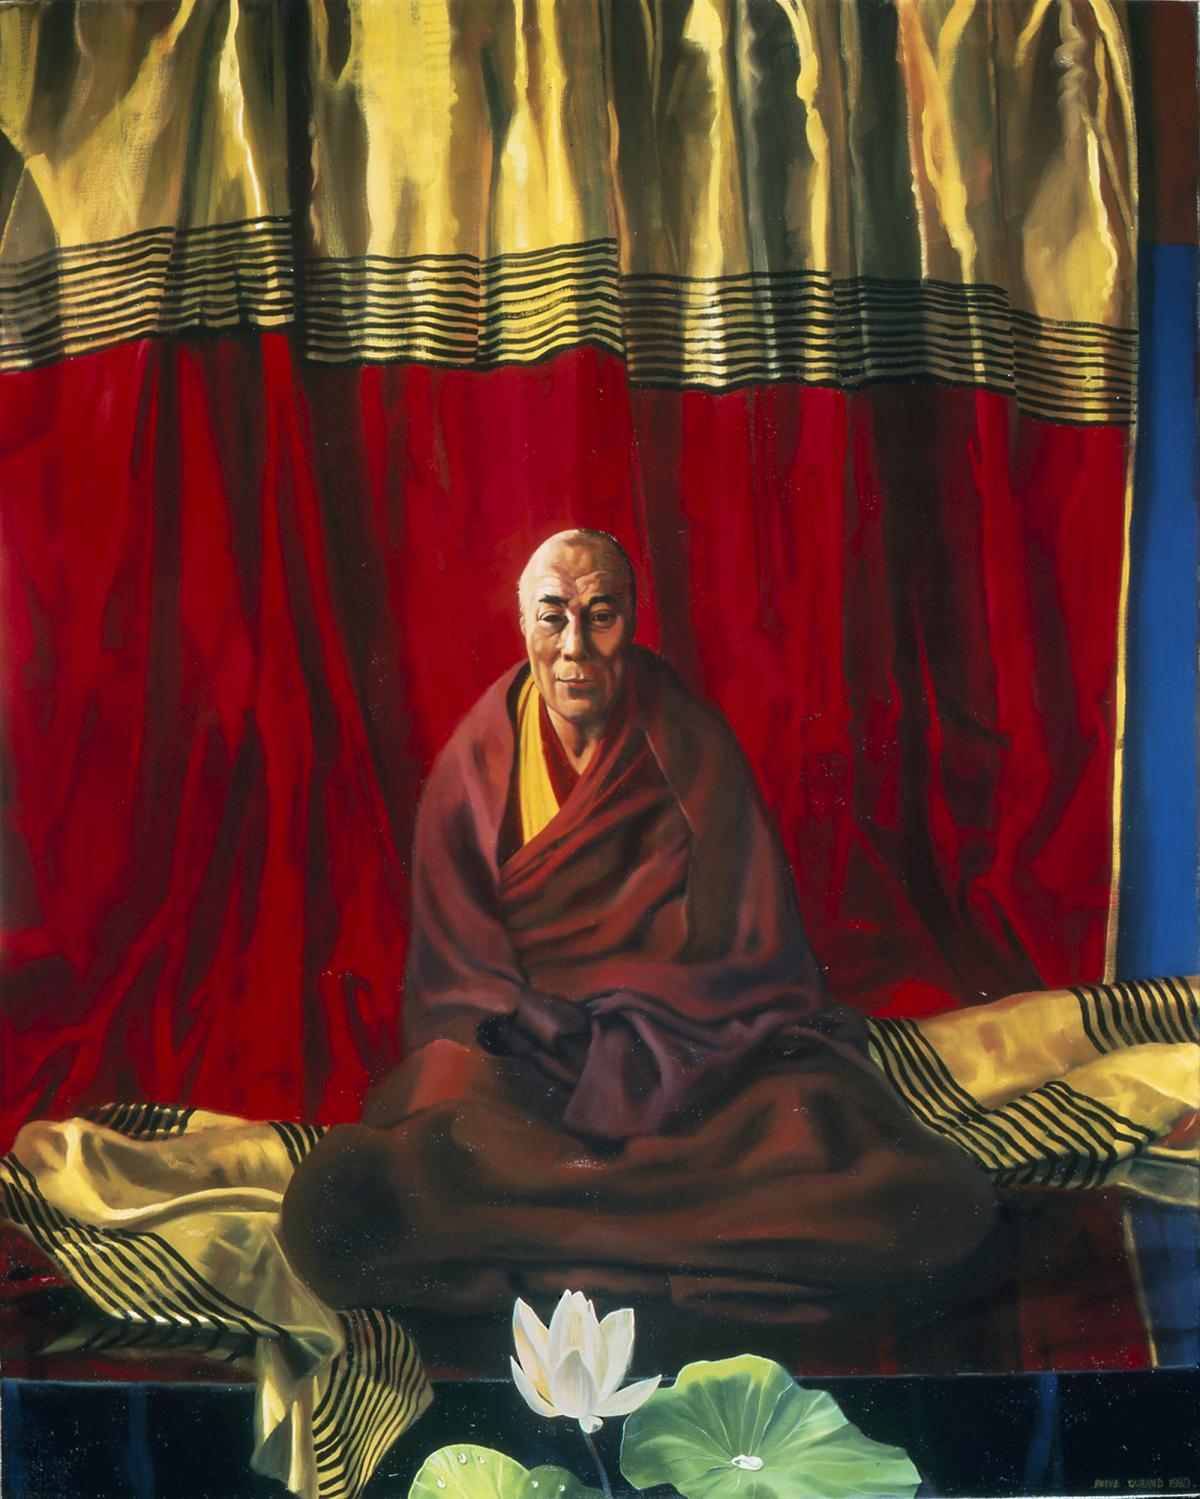 painting of the Dalai Lama against a red background